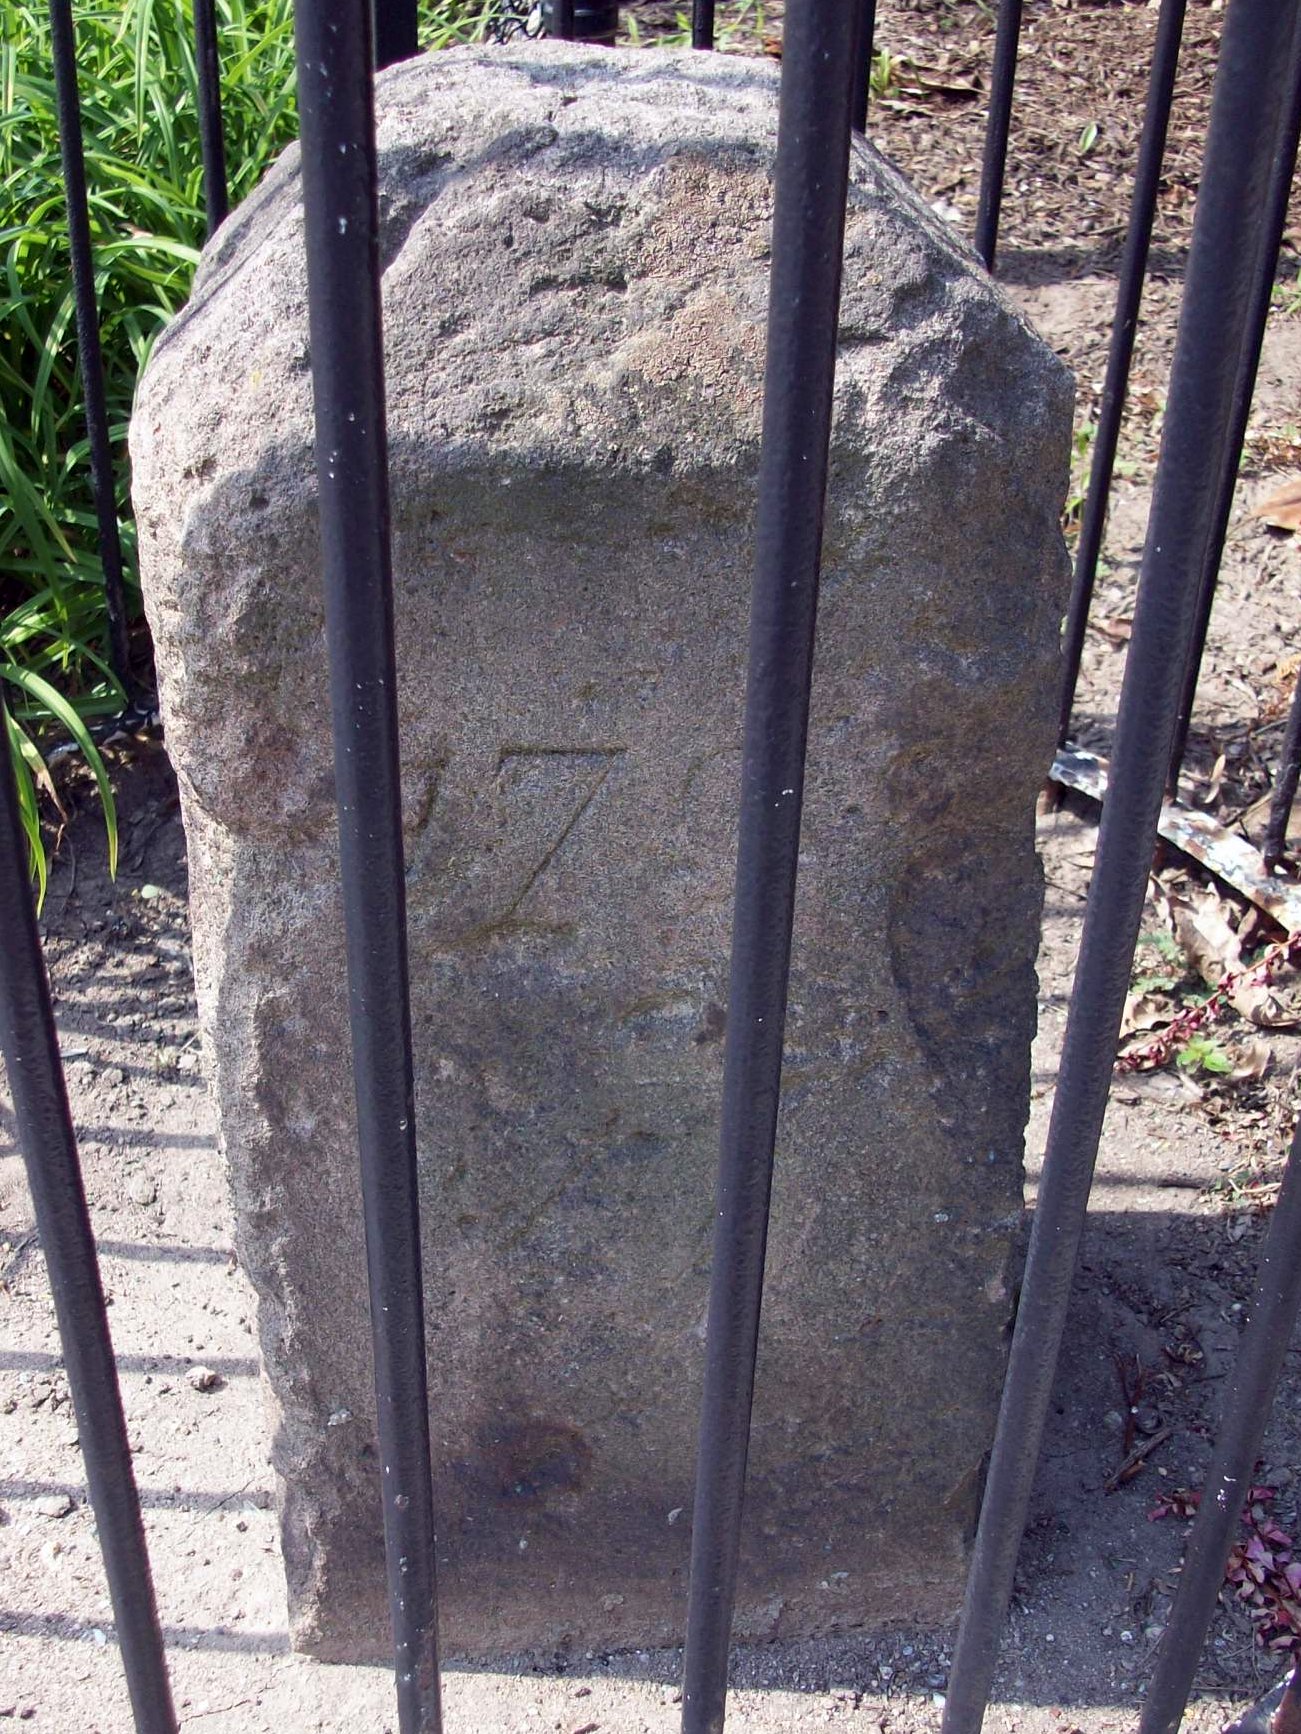 Boundary Marker Northeast No. 2, surrounded by the fence erected by the Daughters of the American Revolution. Image by Bruce Andersen from Washington, DC - Flickr (CC BY-SA 2.0)